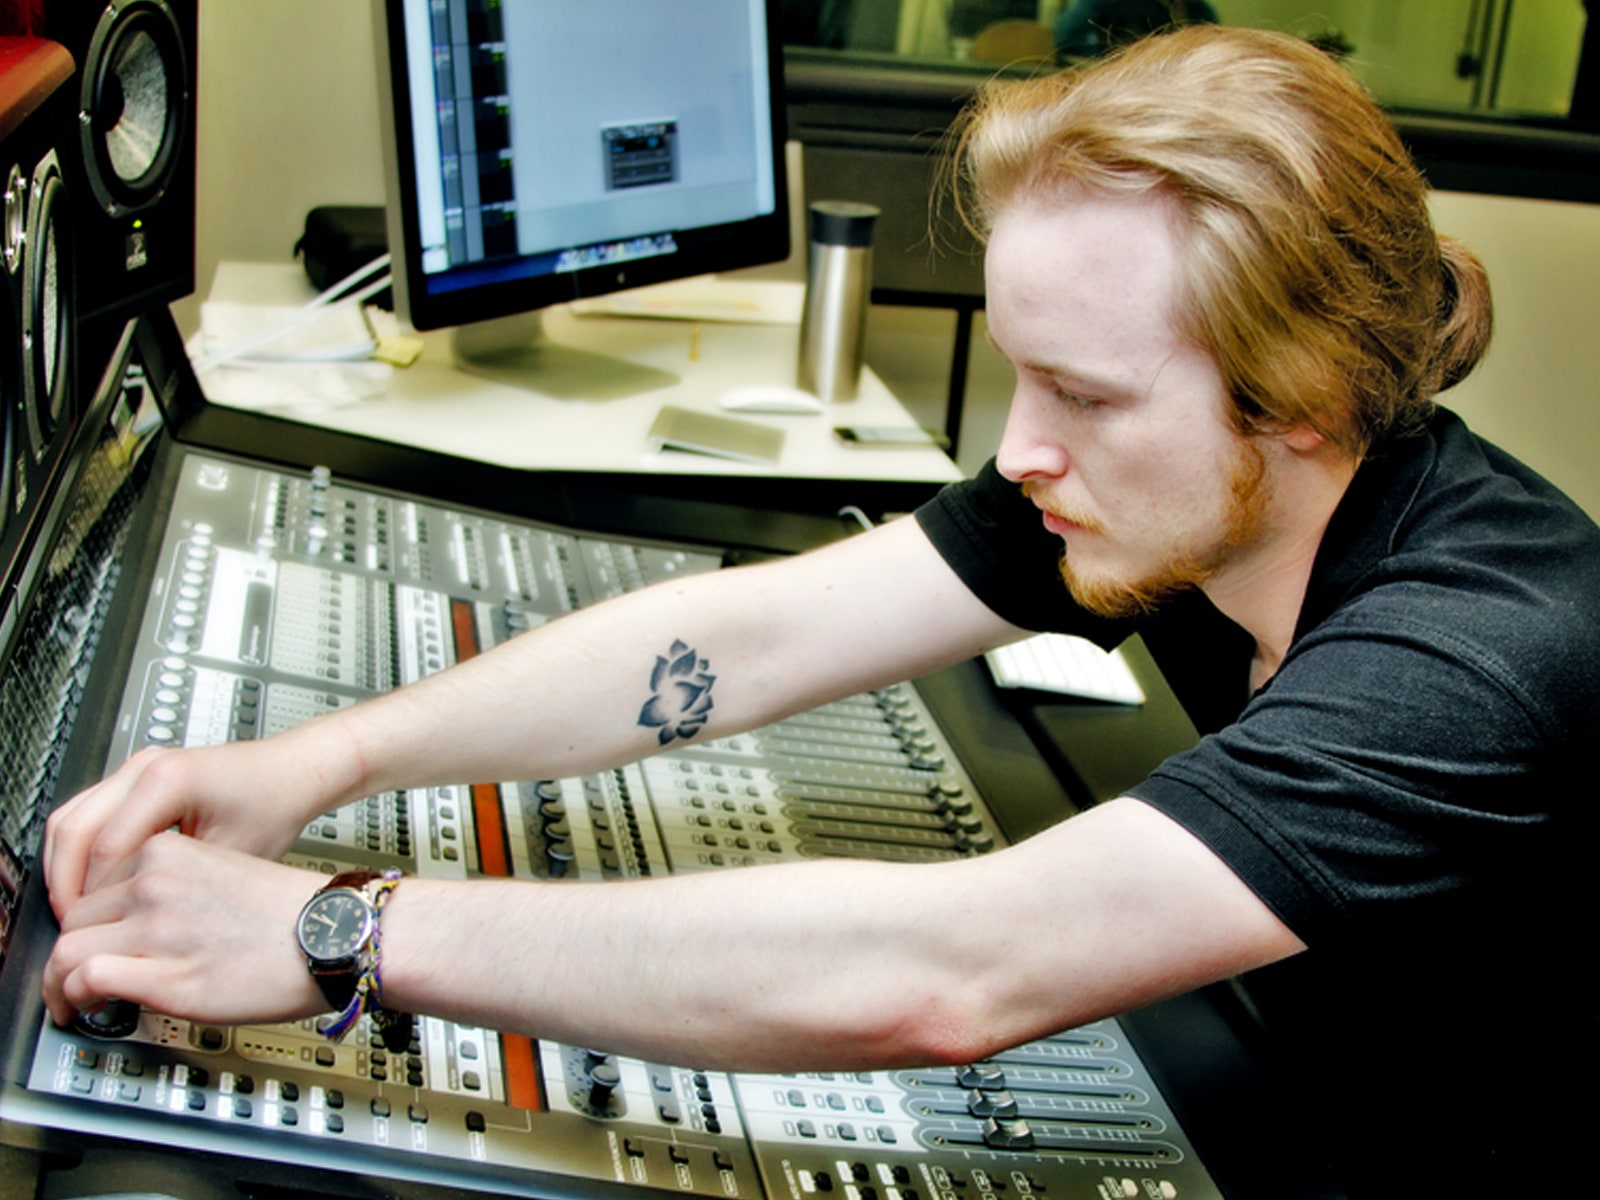 DigiPen student Ian Shores adjusting knobs on a sound board in a DigiPen recording studio